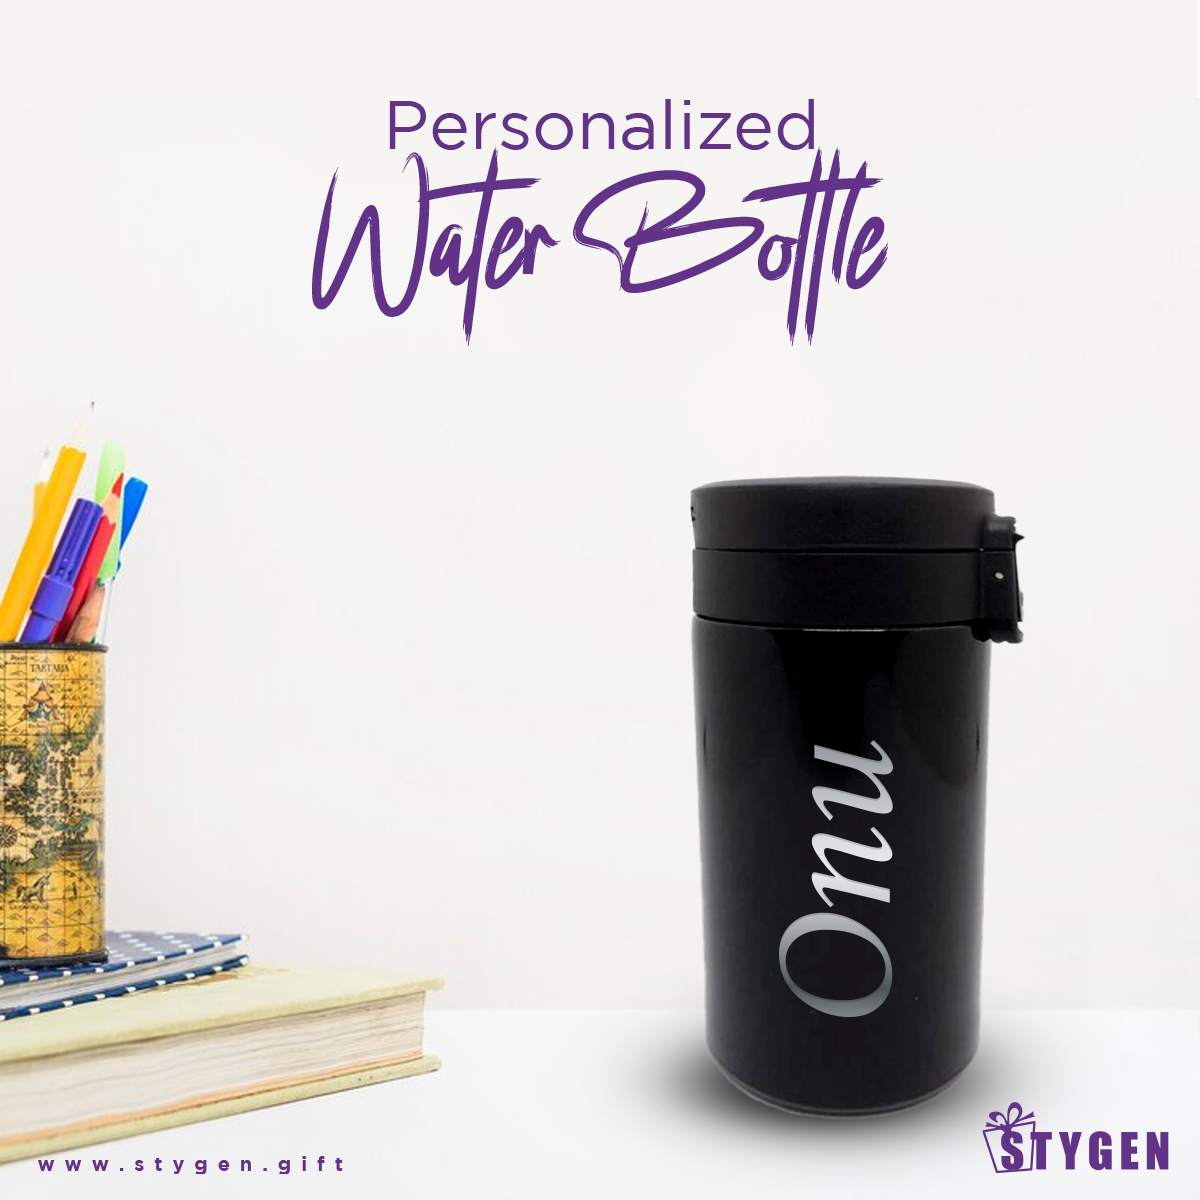 Personalized Thermos Water Bottle for your loved one (12)